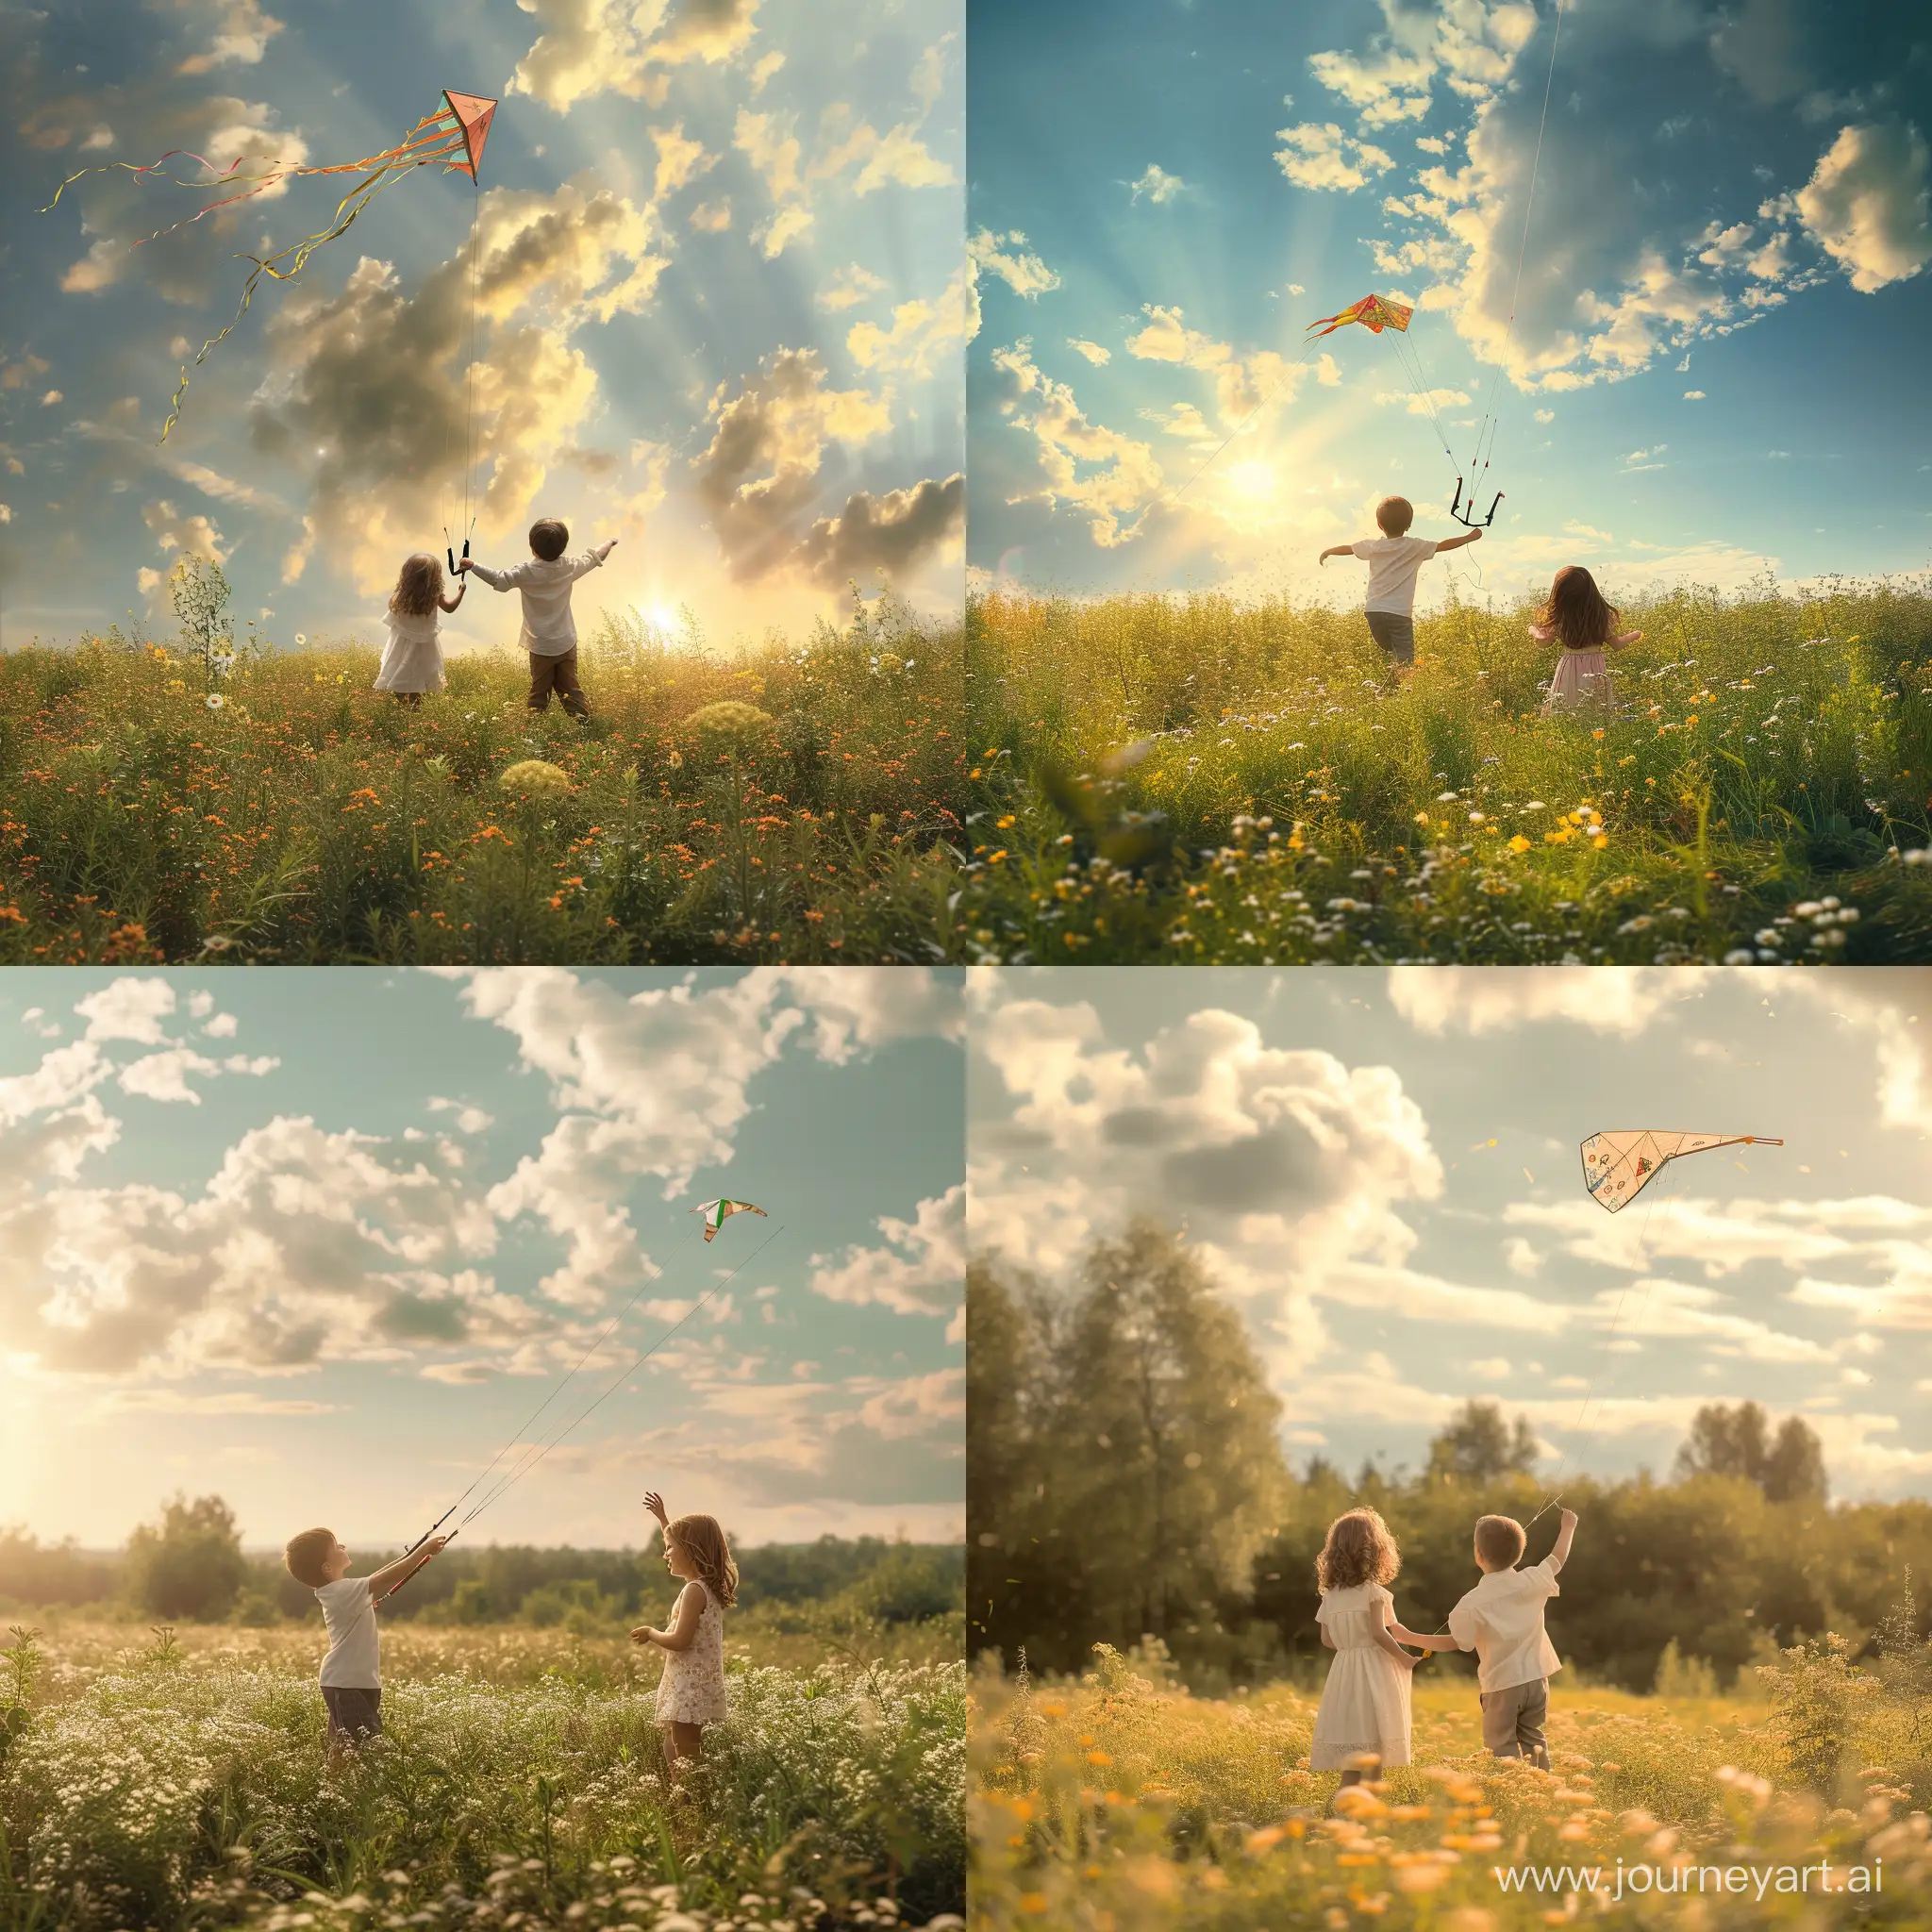 Children-Soaring-High-with-a-Kite-on-a-Sunlit-Meadow